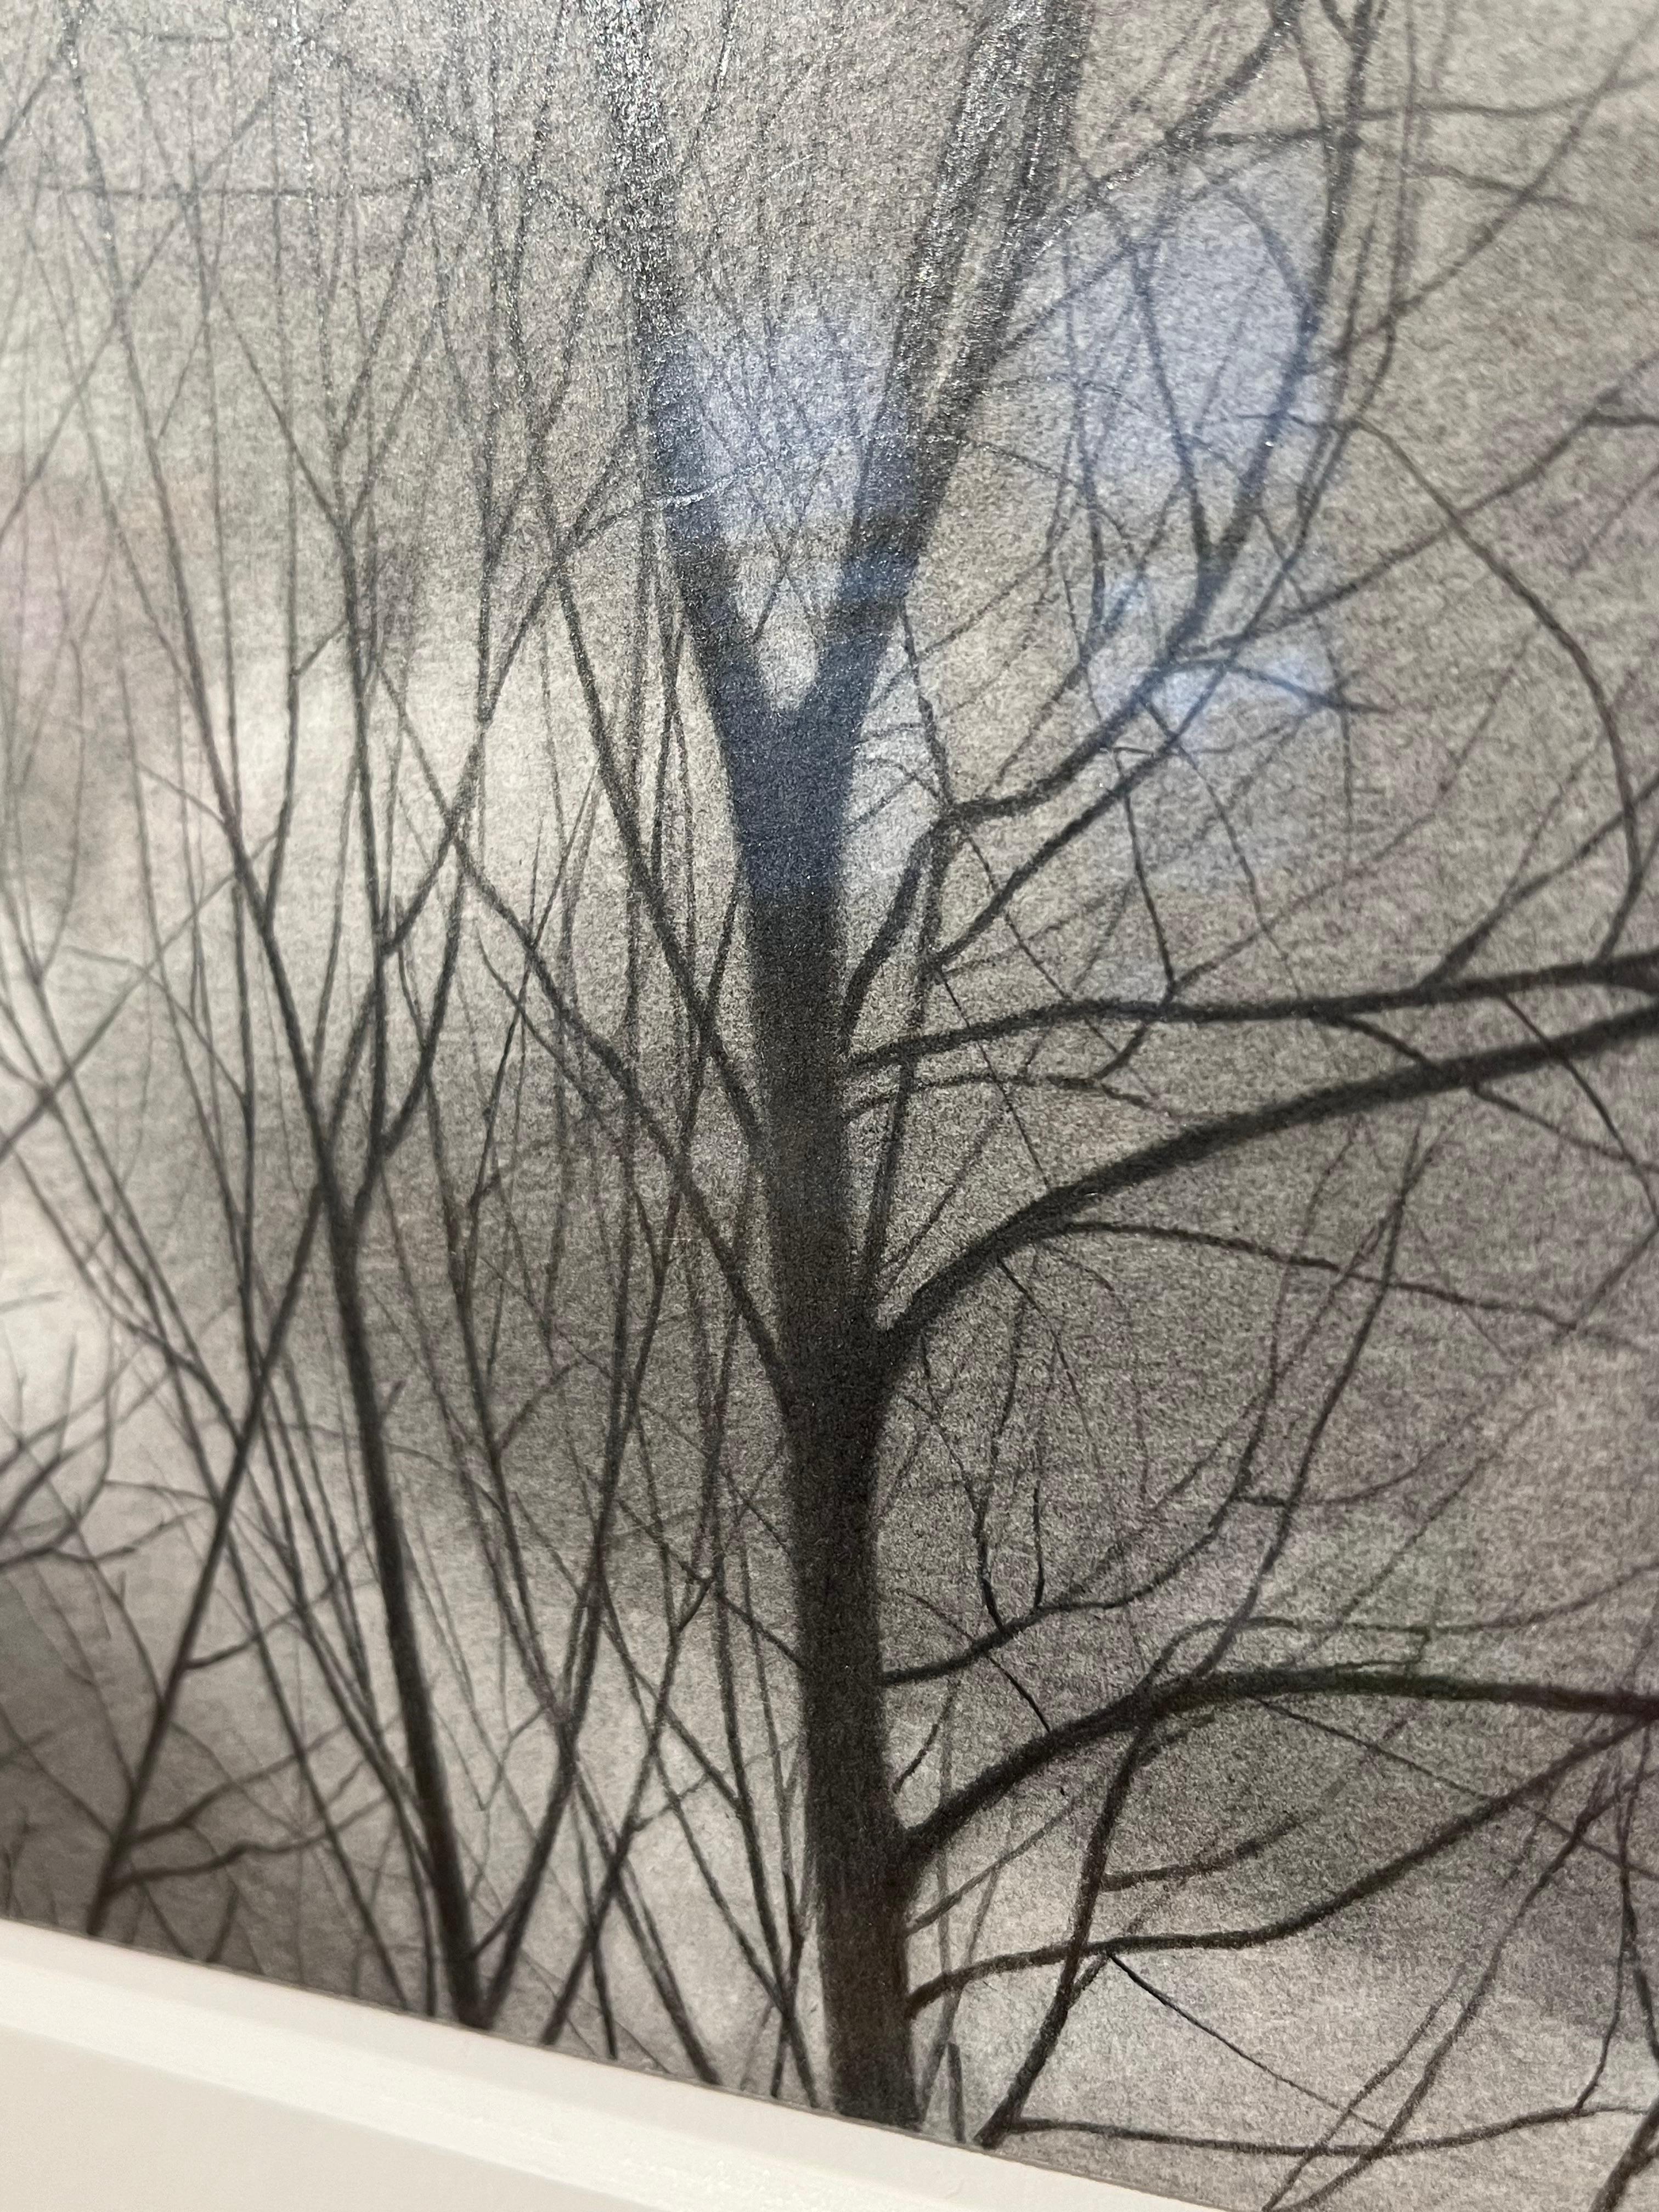 We are delighted to present the first Mary Reilly drawing of the year.

The artist shares her process using graphite below:

For my subject matter, I try to find and emphasize the beauty of those locations and images in nature which are often beyond